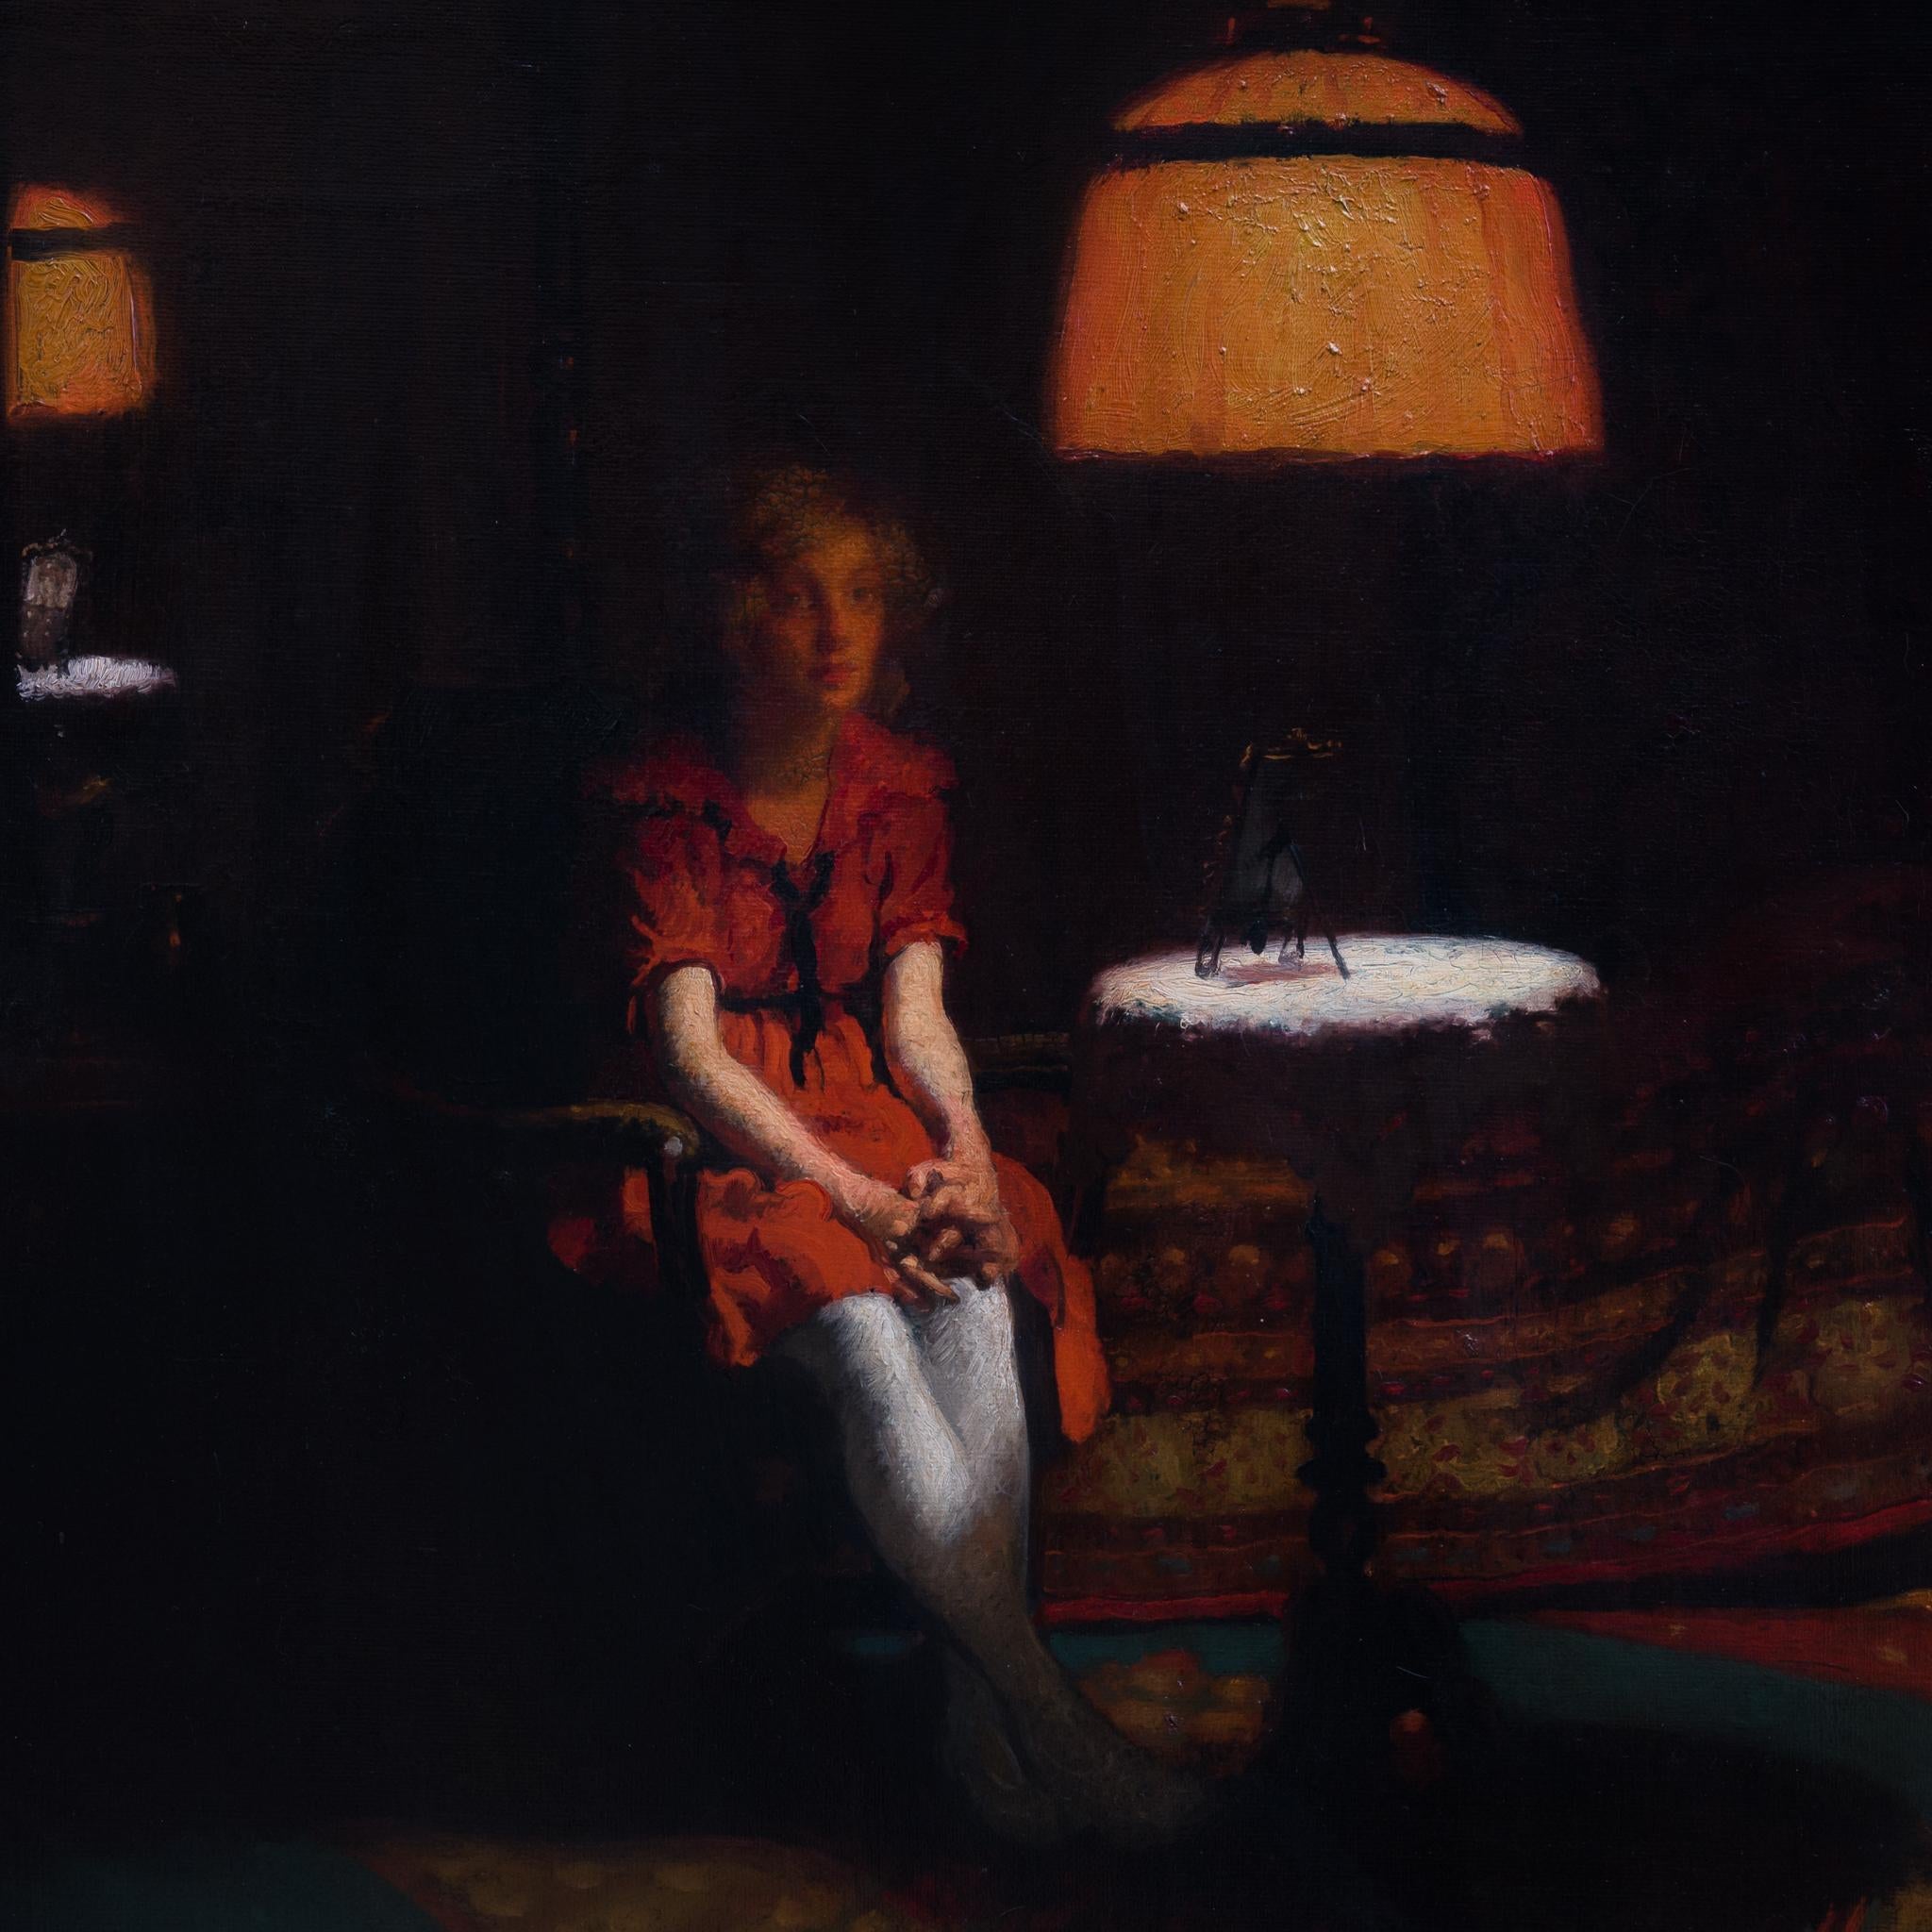 This painting features a young girl sitting on a chair in a dimly lit room, illuminated by the soft glow of an orange-tinted ceiling lamp. This painting captures the essence of the candle-light genre of art, which originated in the 17th century and